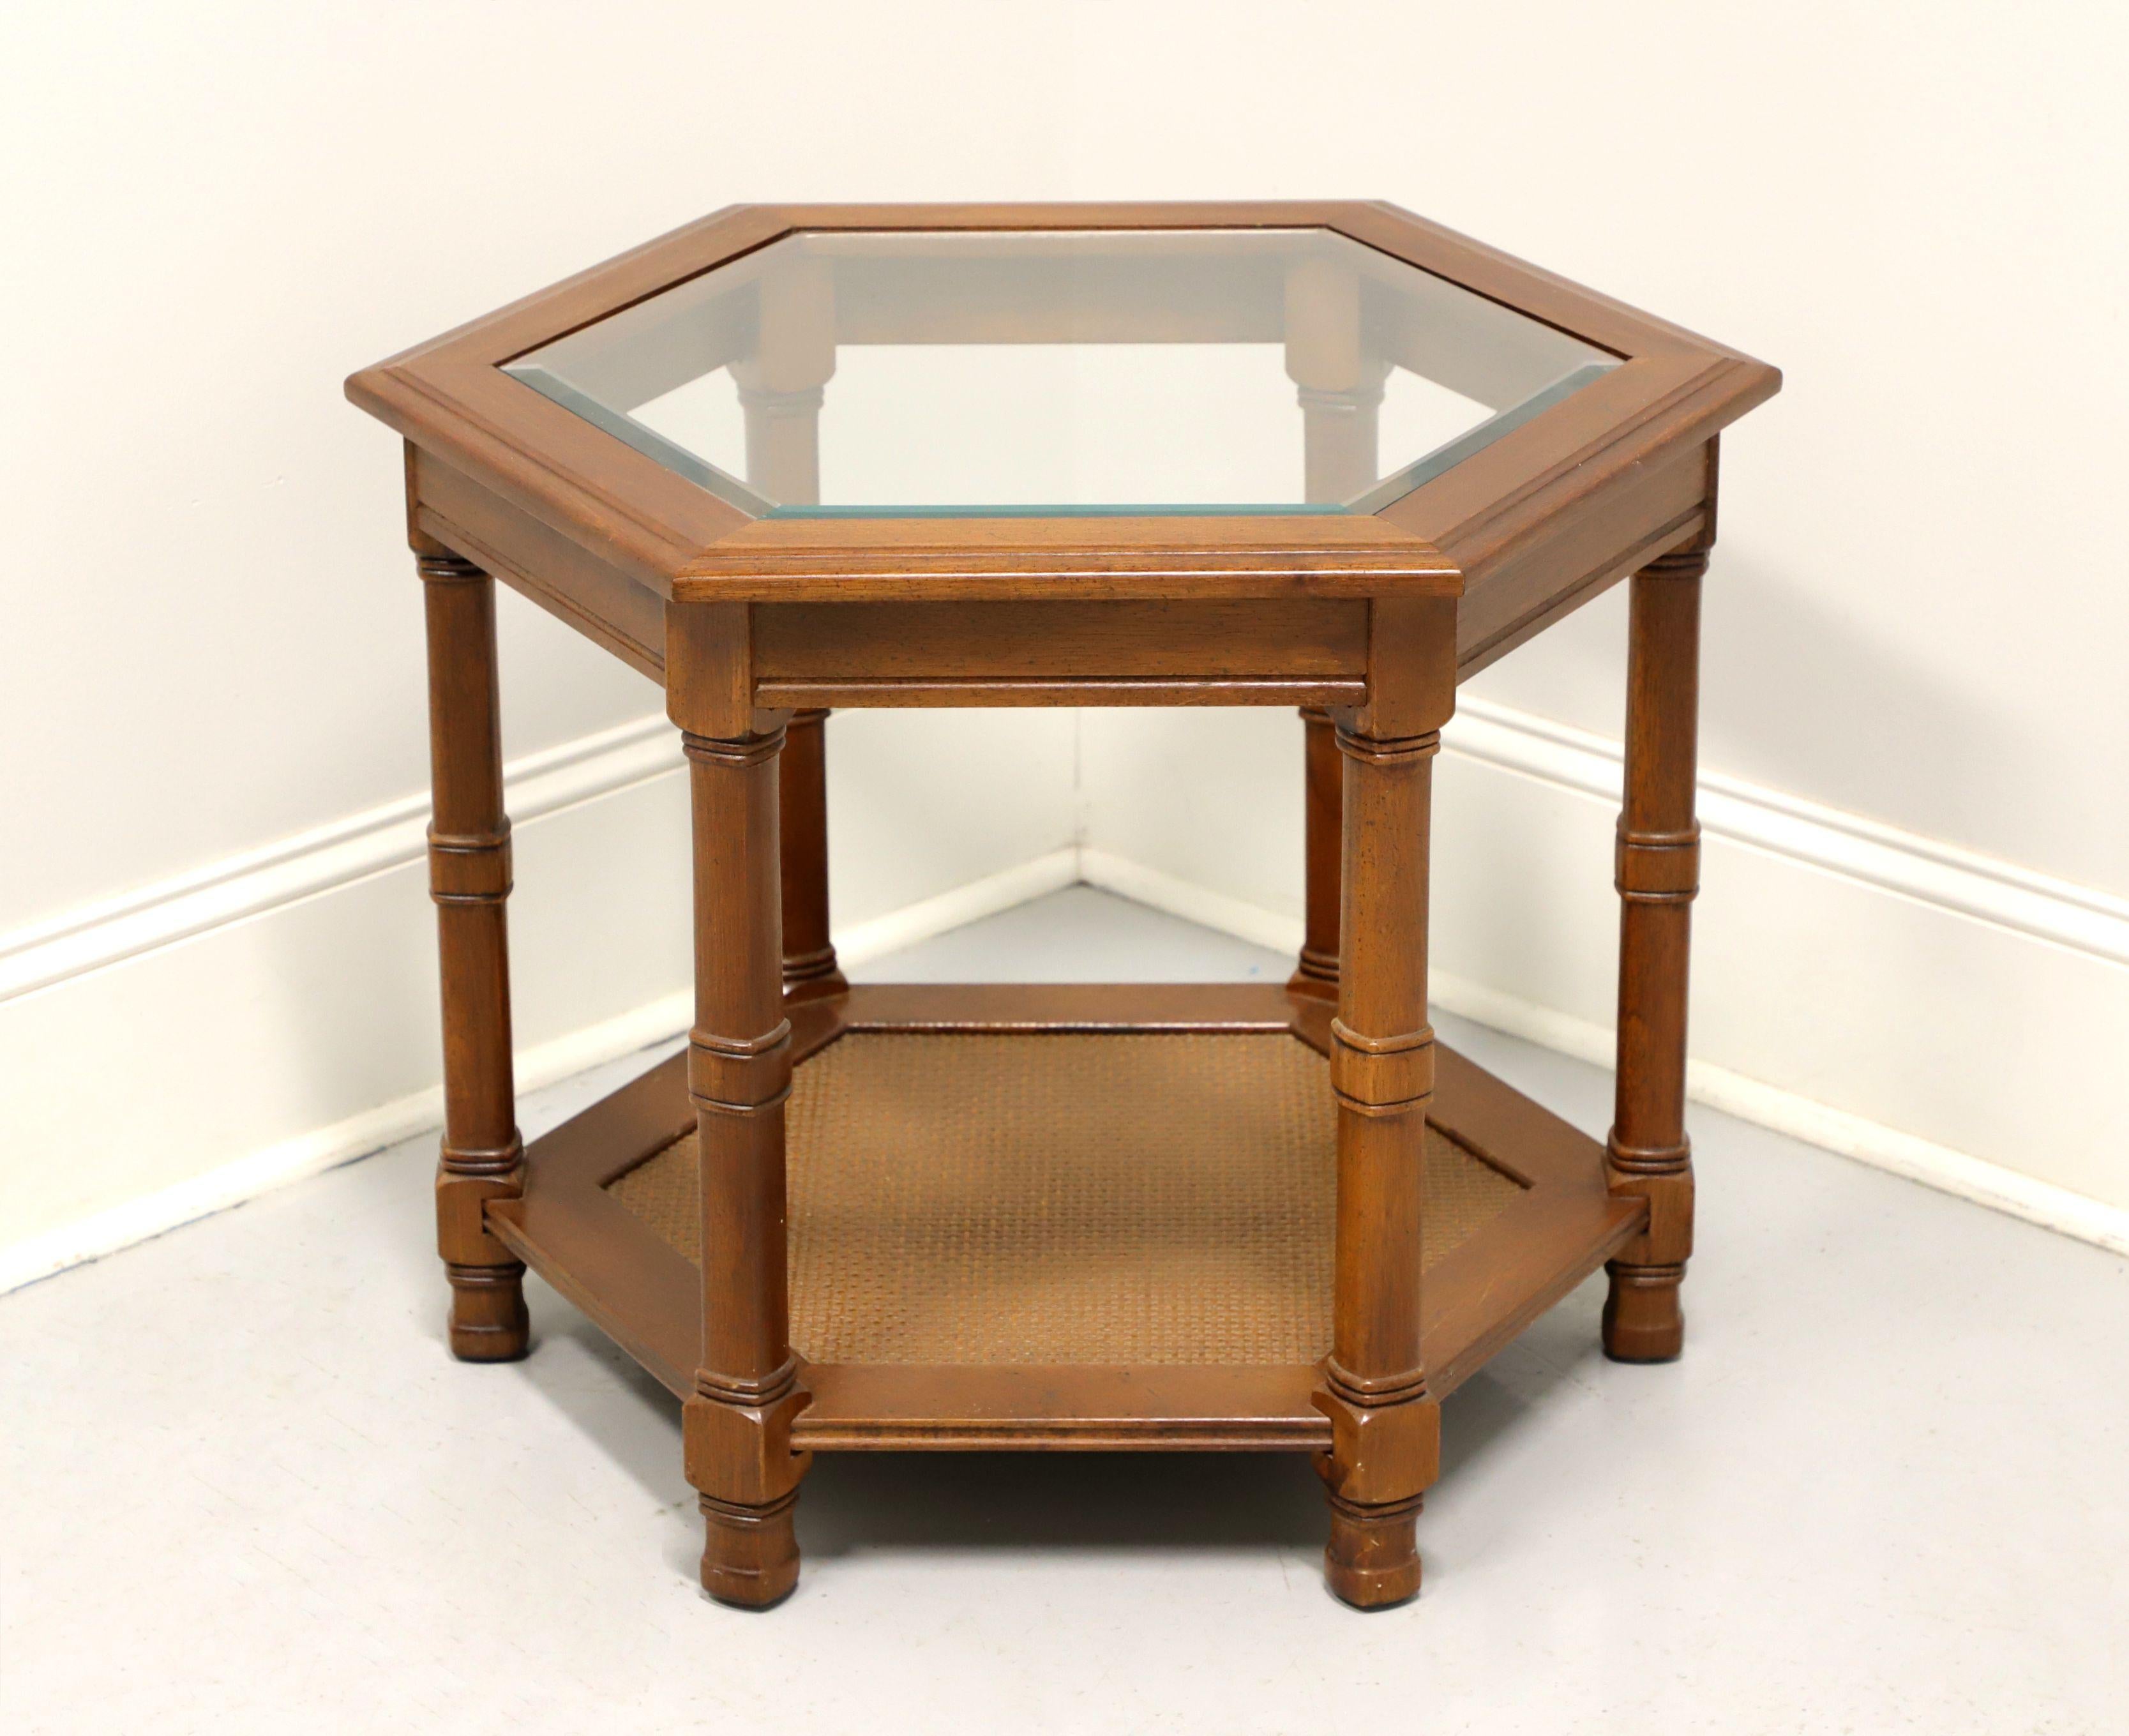 A mid 20th century hexagonal shaped glass top accent table, unbranded, similar quality to Henredon. Walnut with beveled glass top, six legs and caned undertier shelf. Made in the USA.

Measures: 27.5 W 23.75 D 20.75 H

Exceptionally good